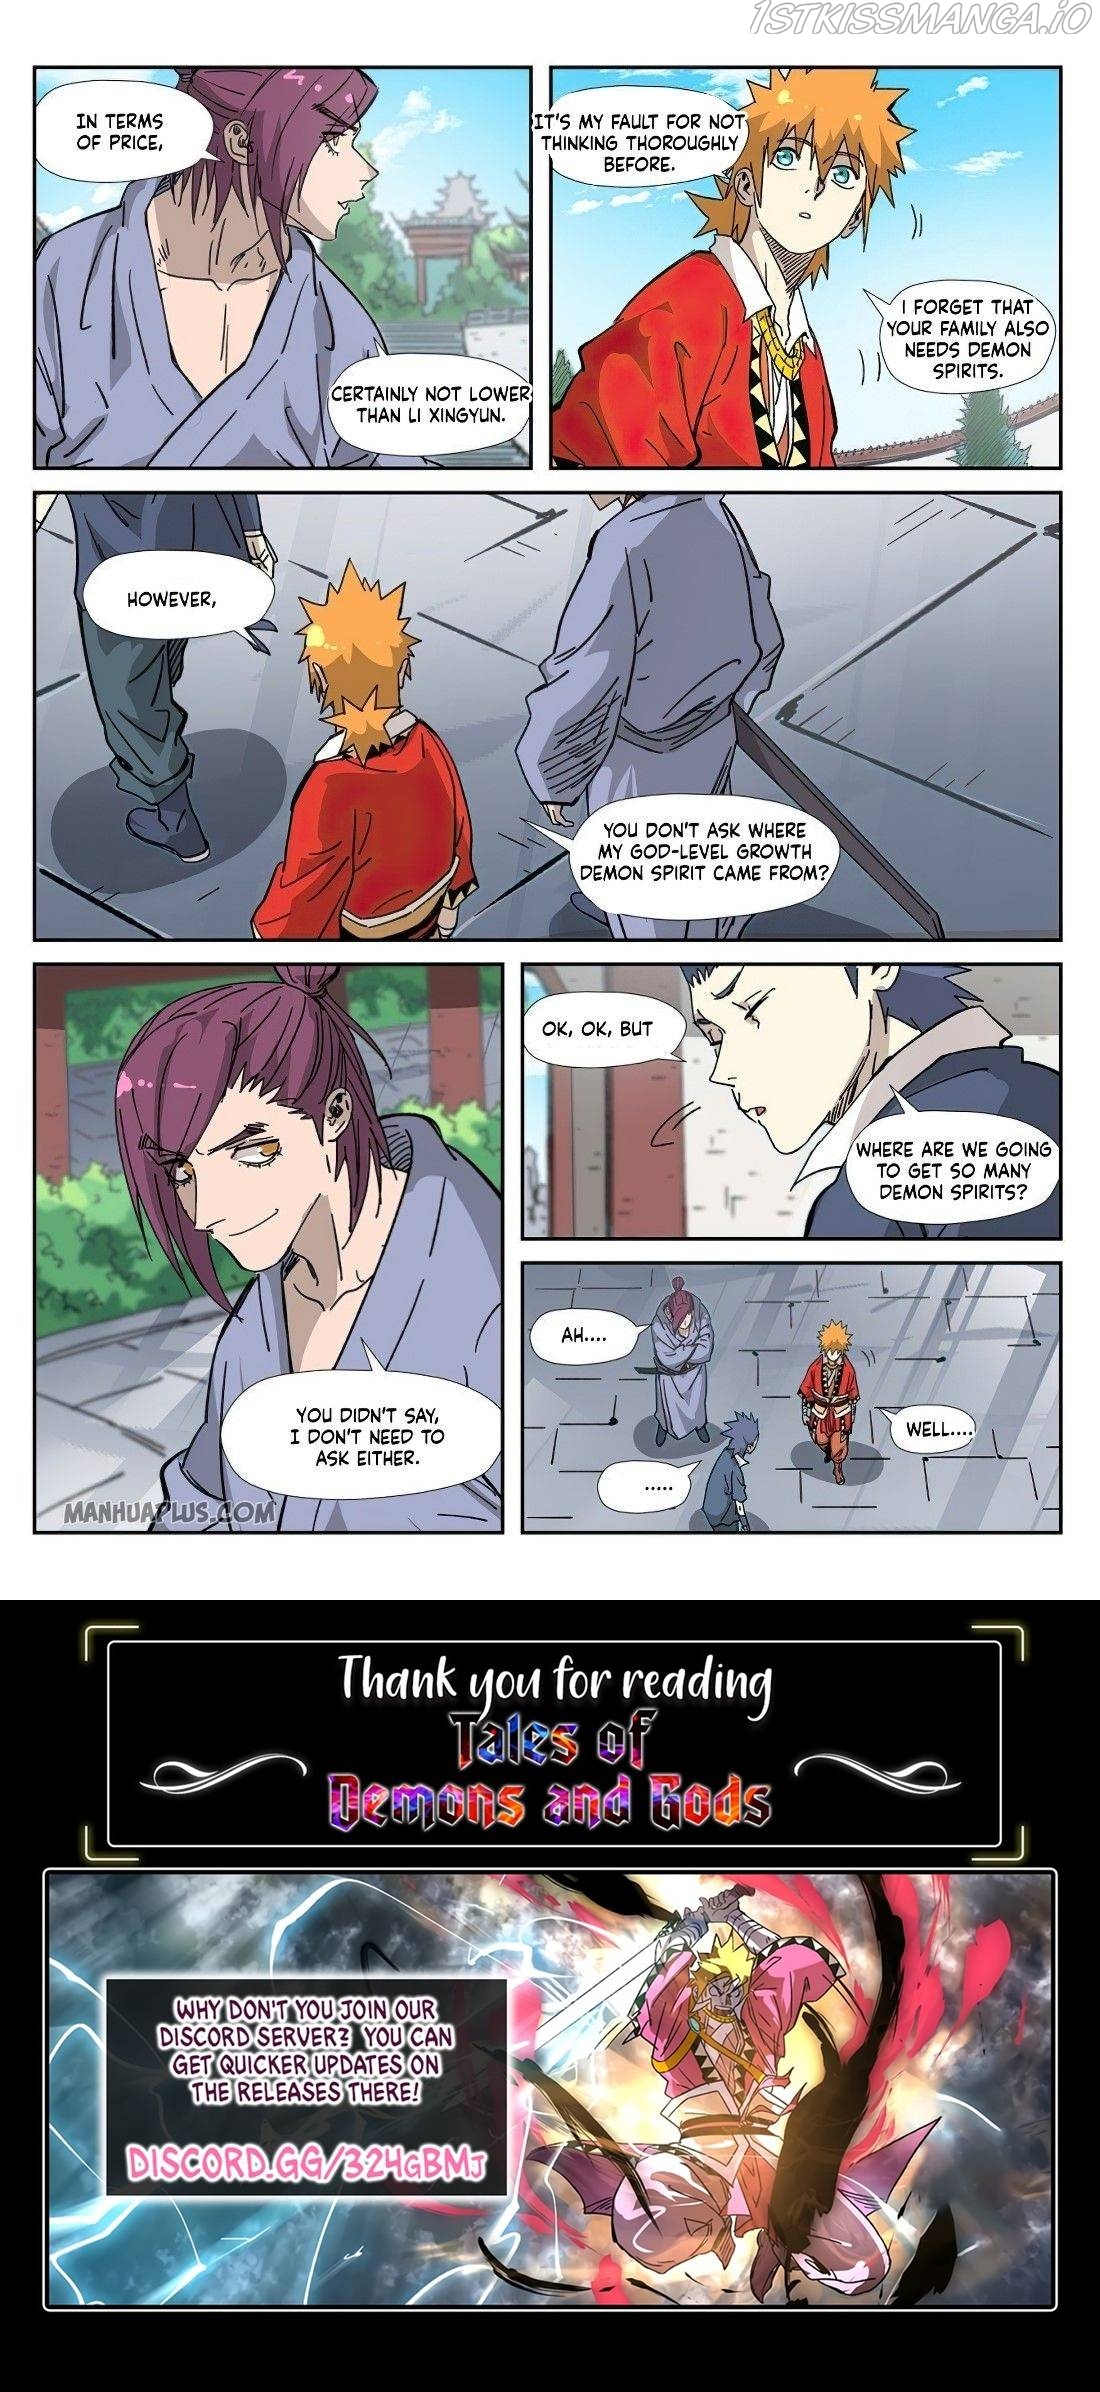 Tales of Demons and Gods Manhua Chapter 328.5 - Page 9